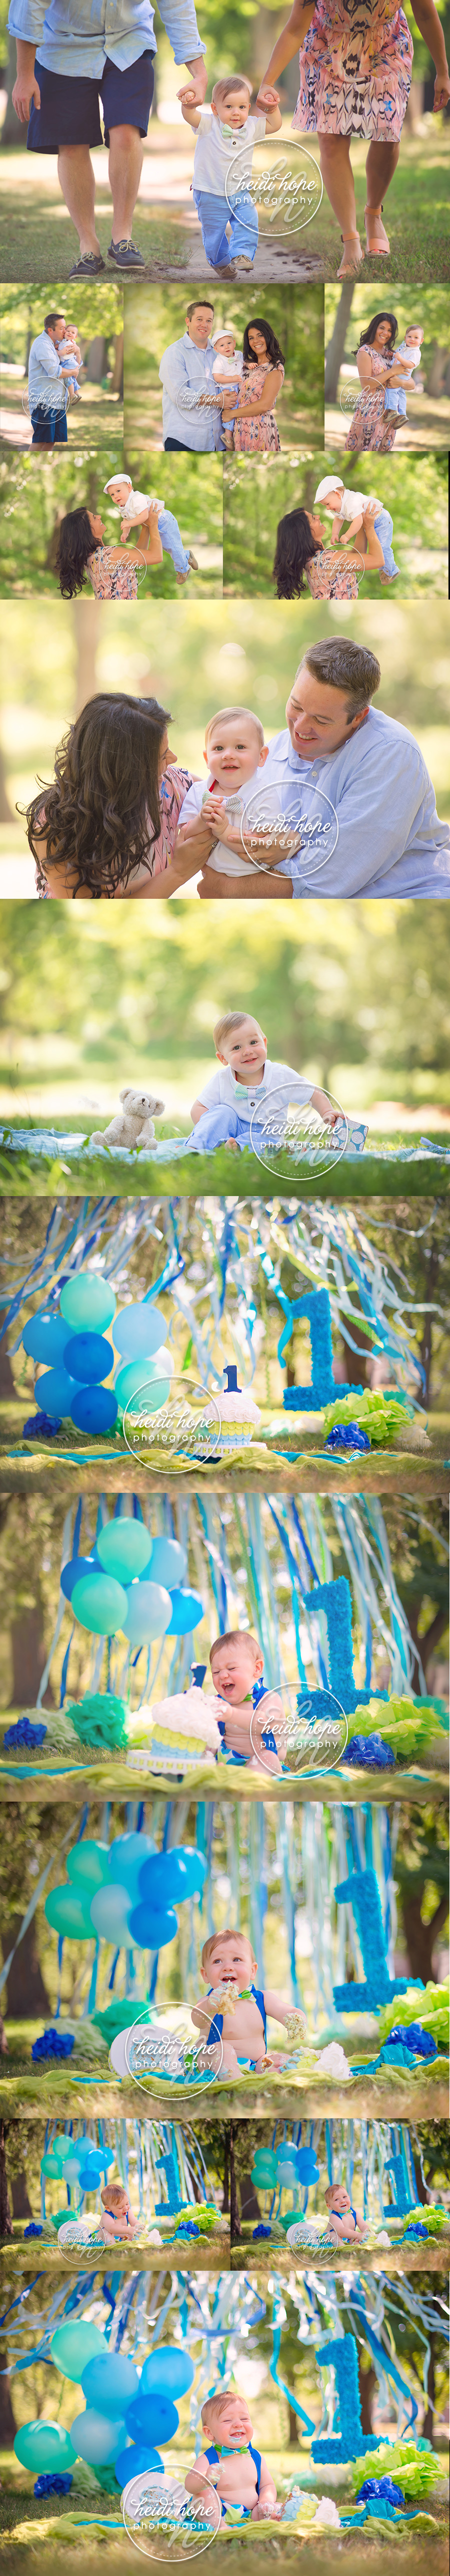 a-blue-and-green-classic-cakesmash-outdoors-at-the-park-by-rhode-island-birthday-photographer